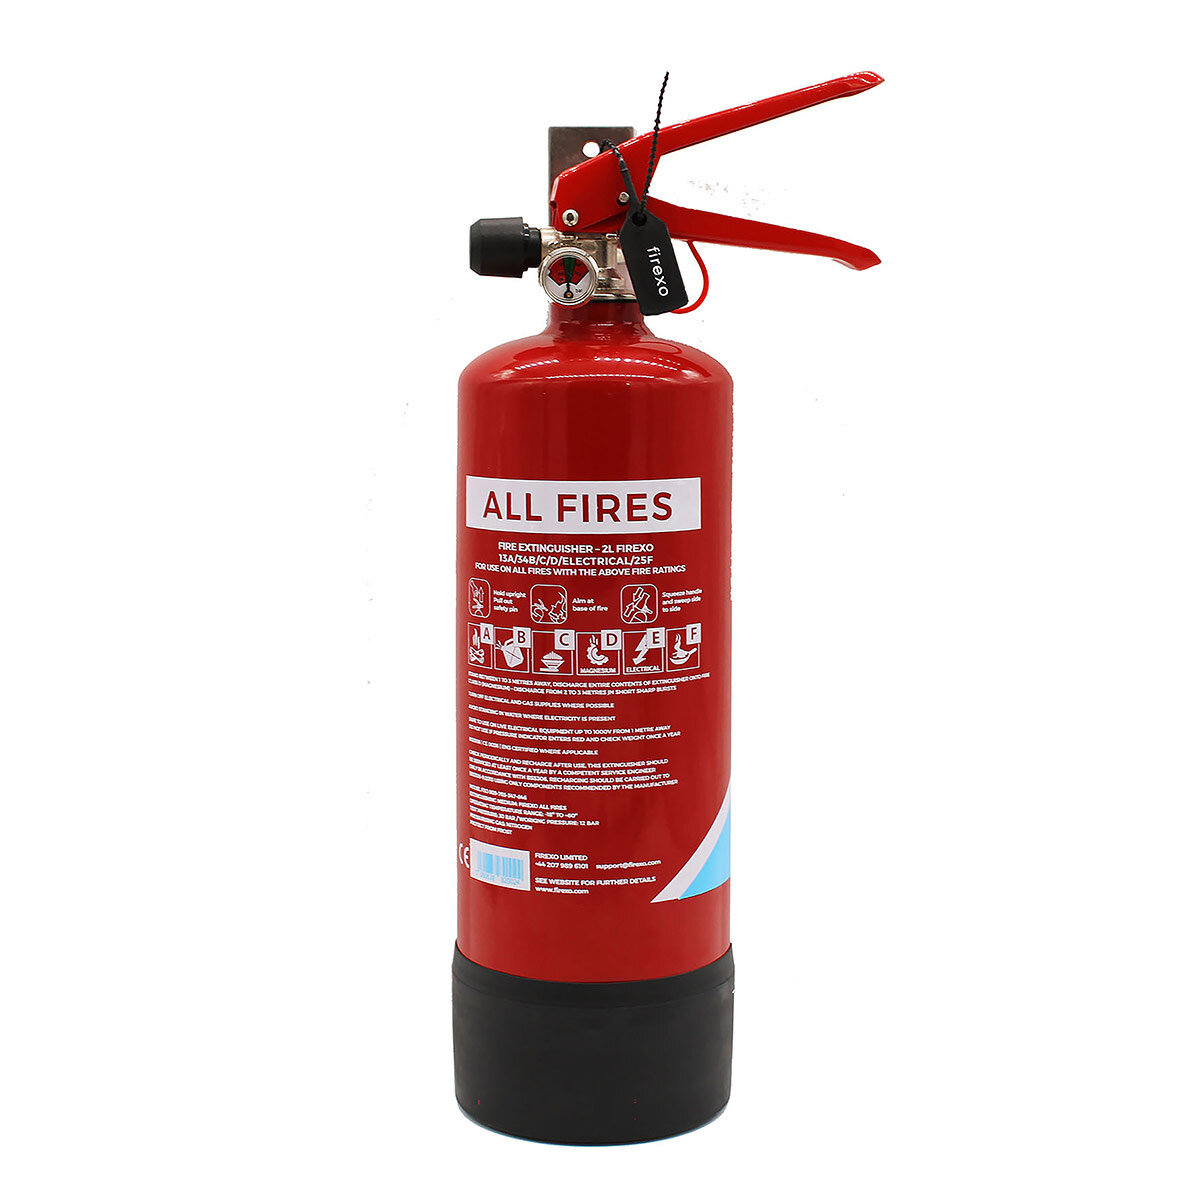 Cut out image of fire extinguisher on white background